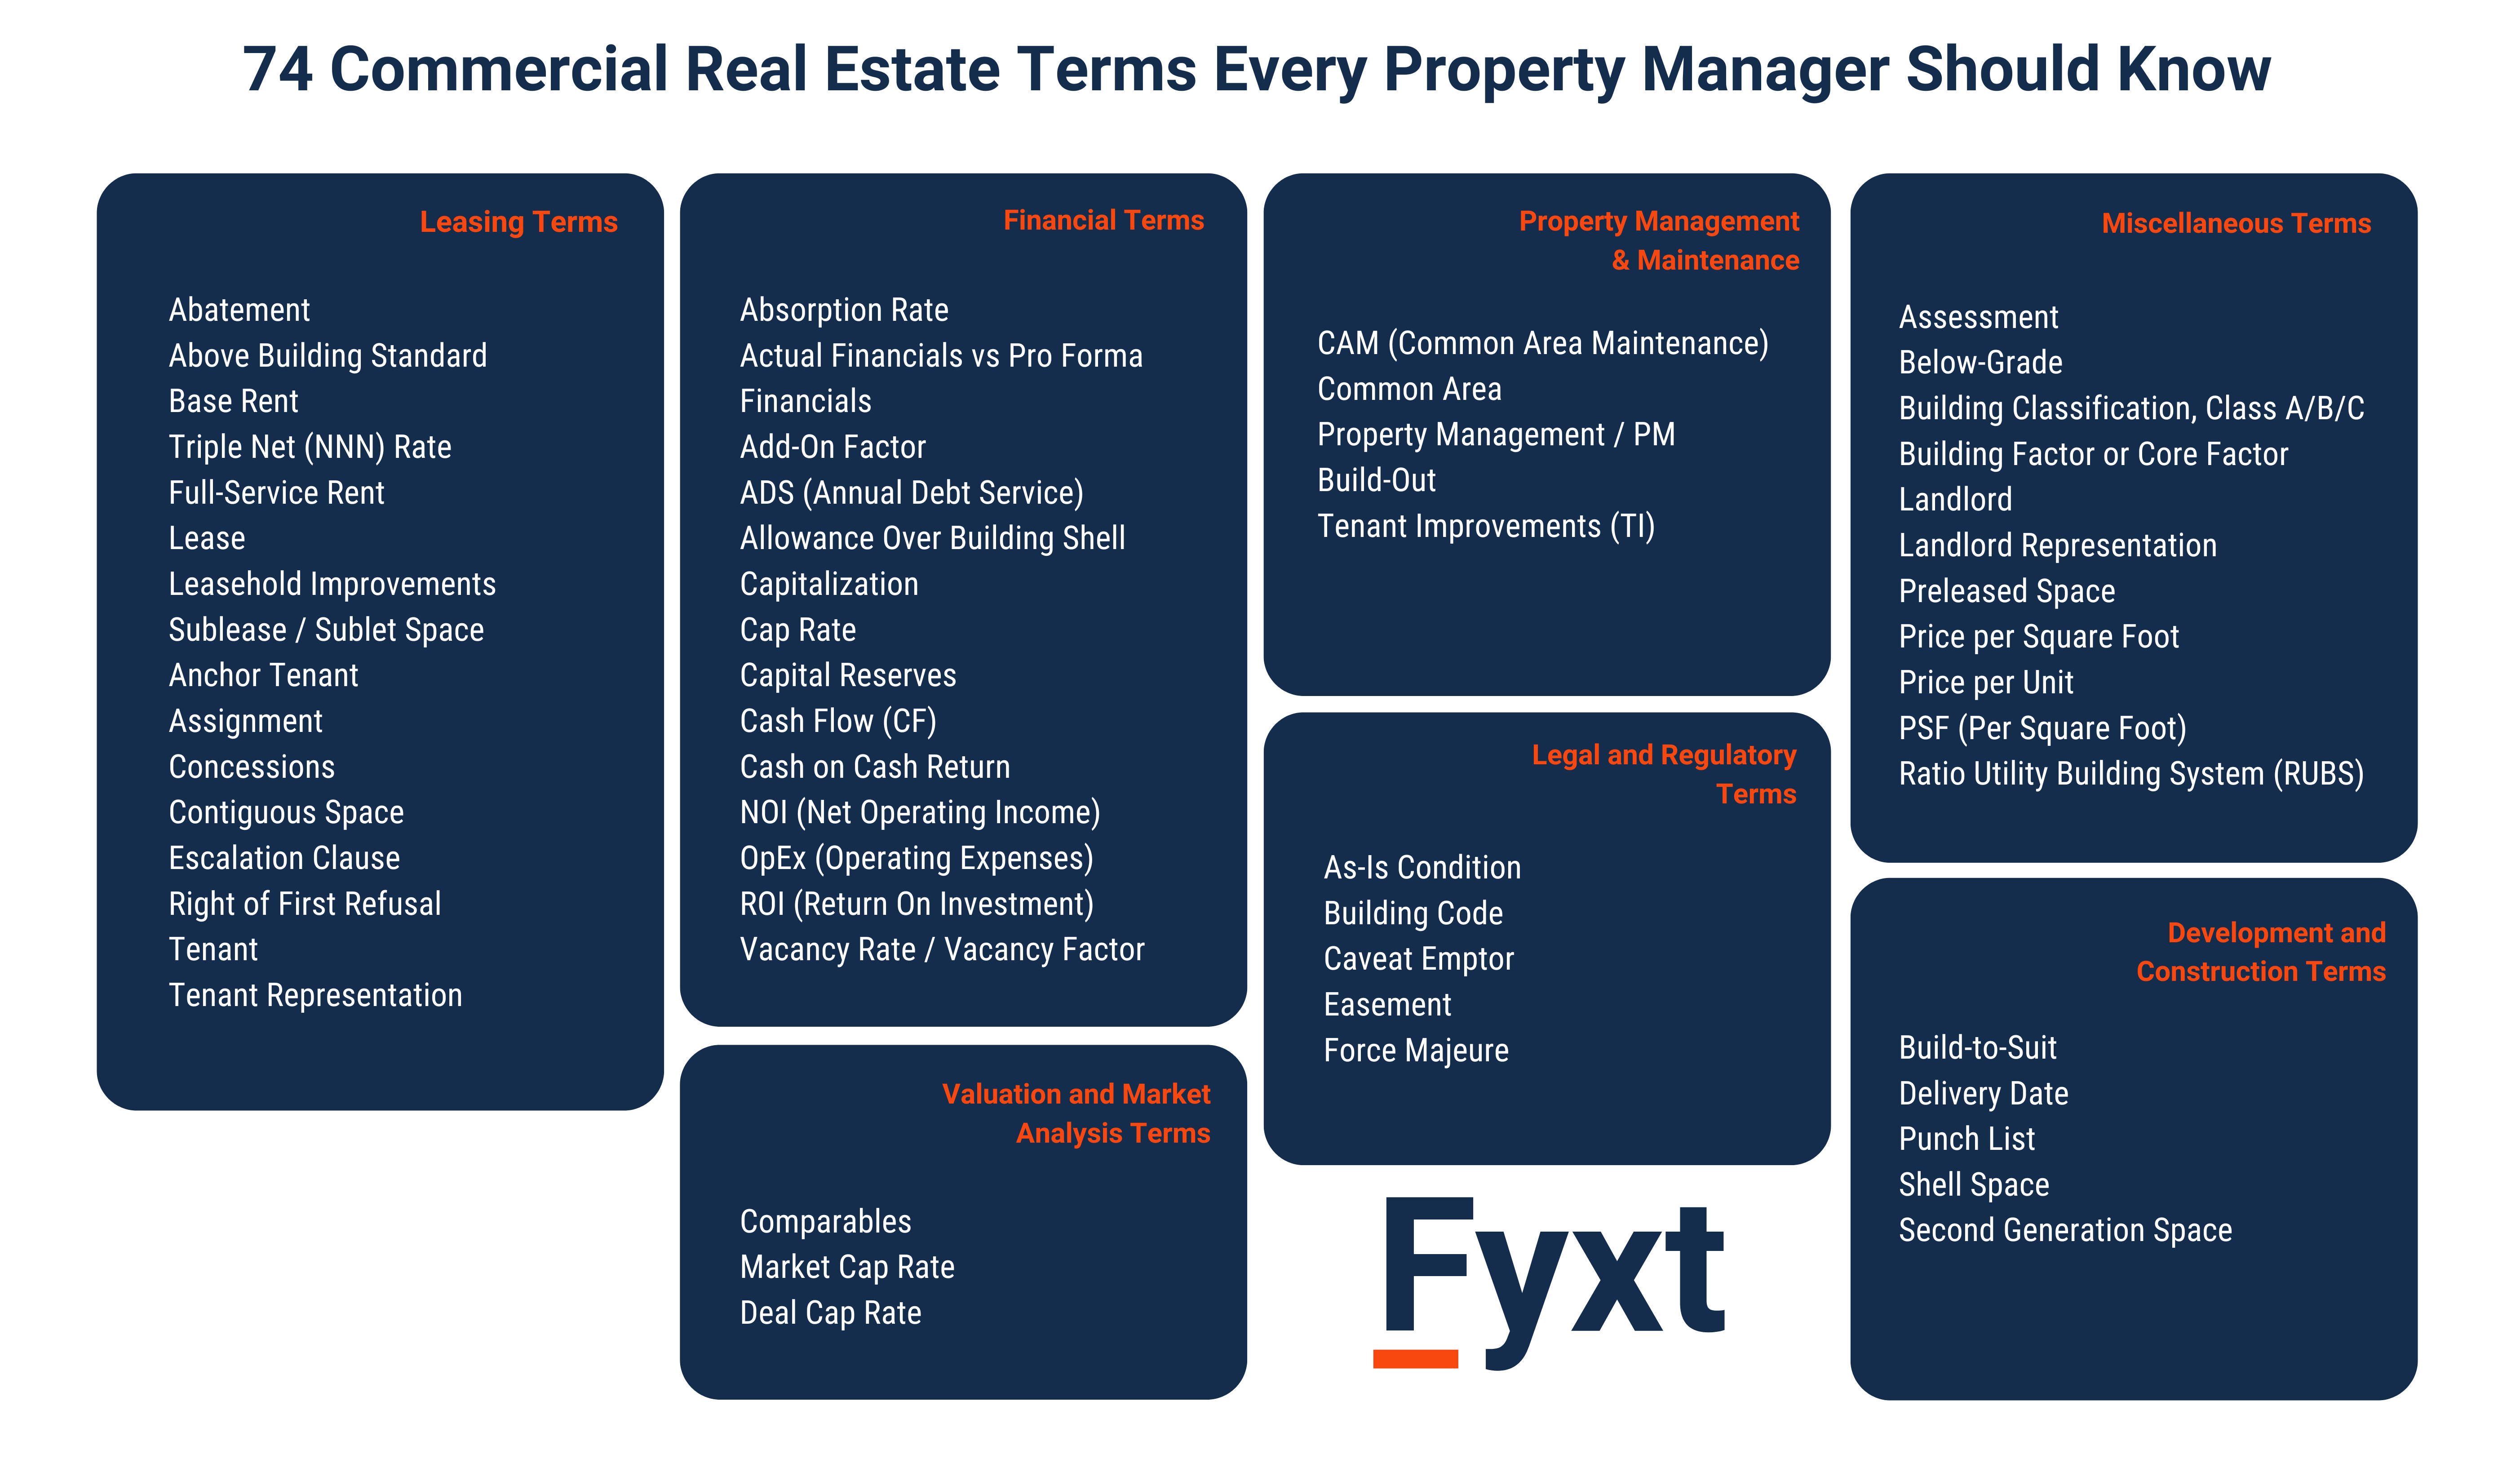 74 Commercial Real Estate Terms Every Property Manager Should Know